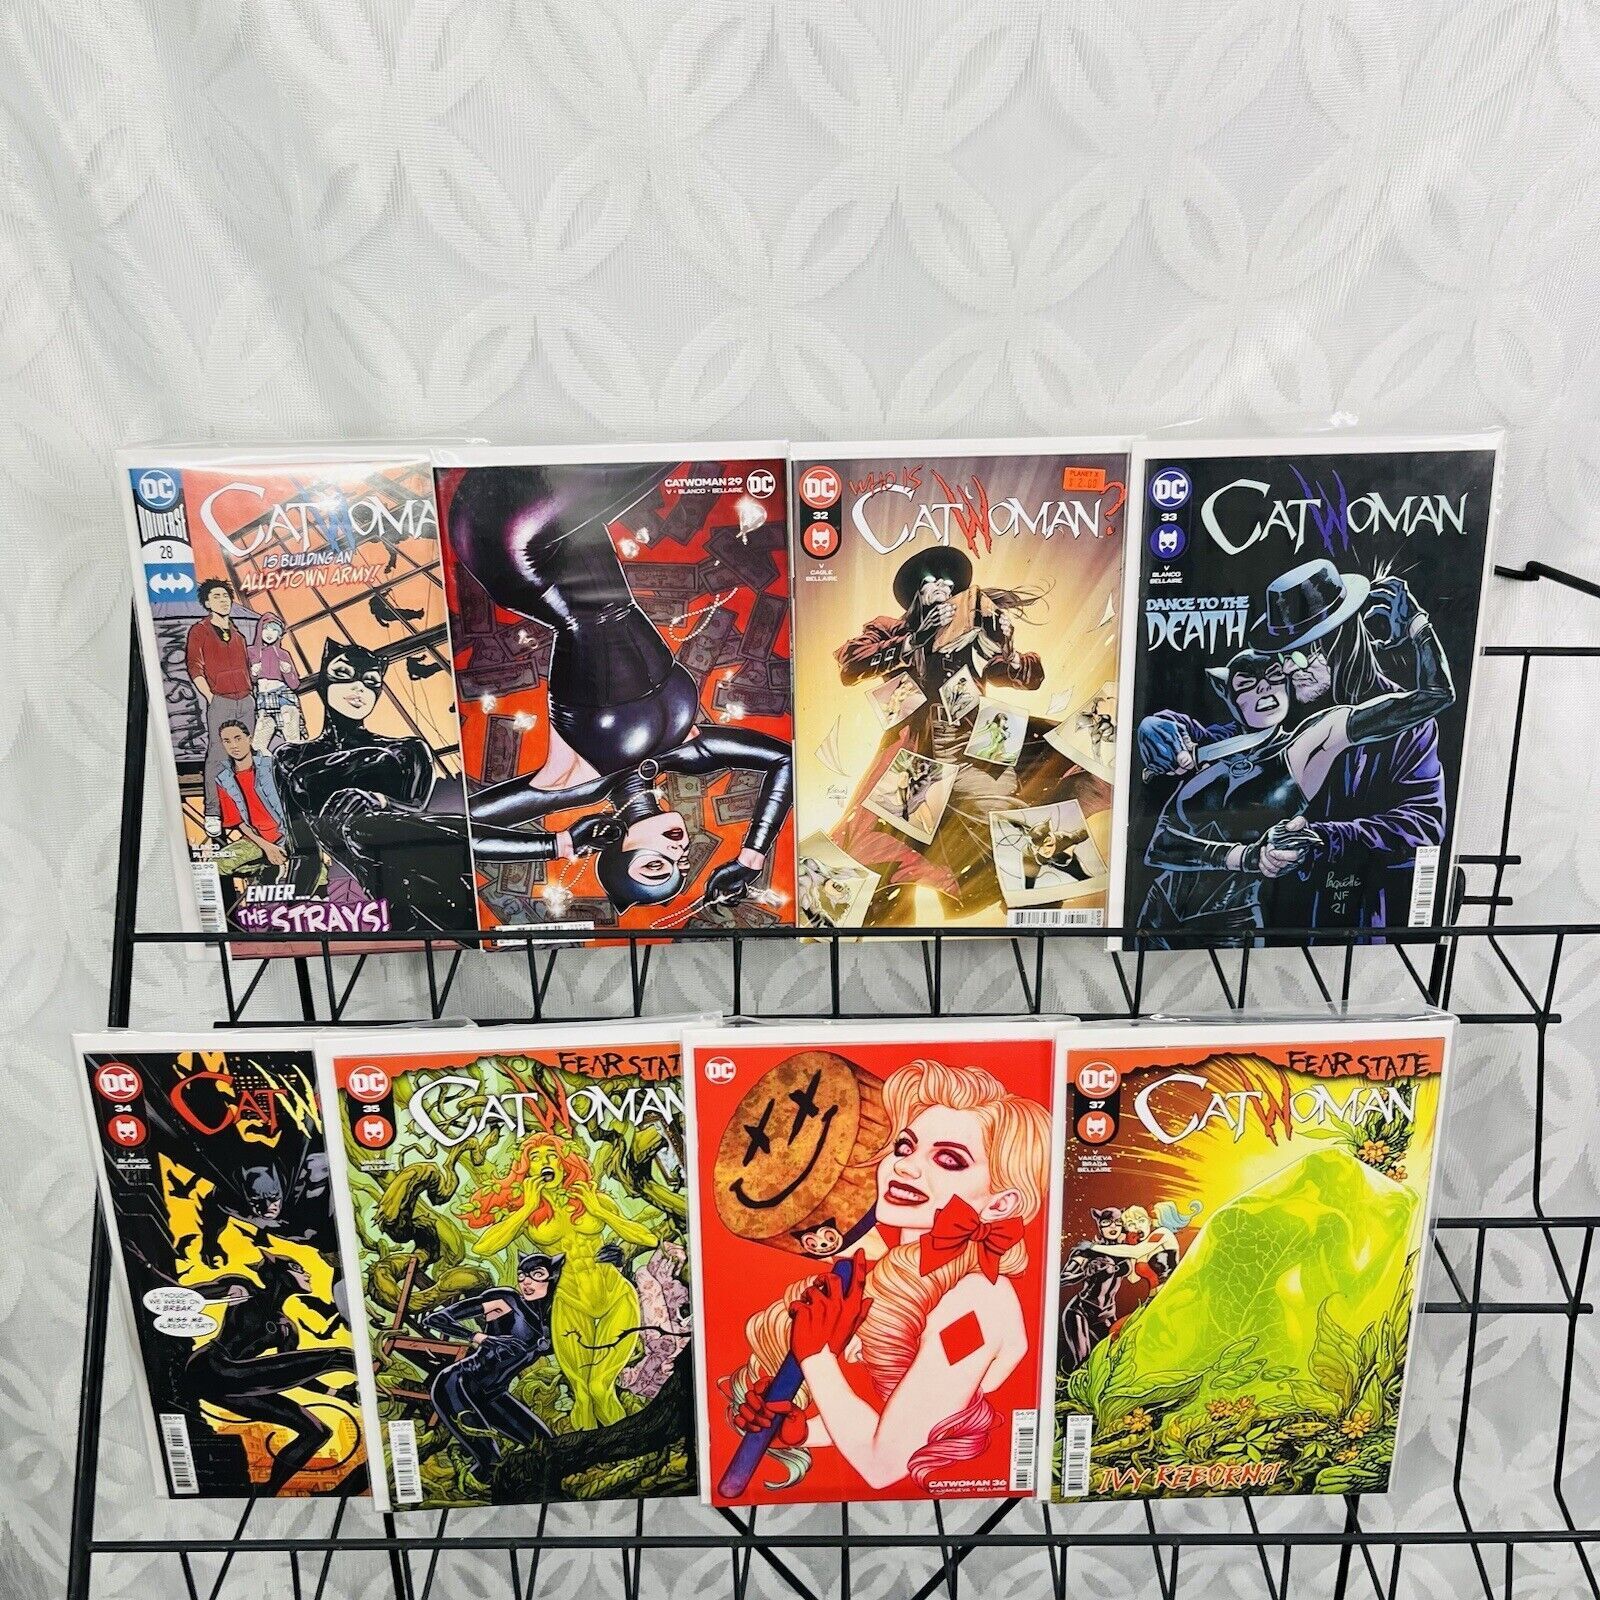 Catwoman 28-29 32-37 lot (DC 2021) Jenny Frison Variant Covers